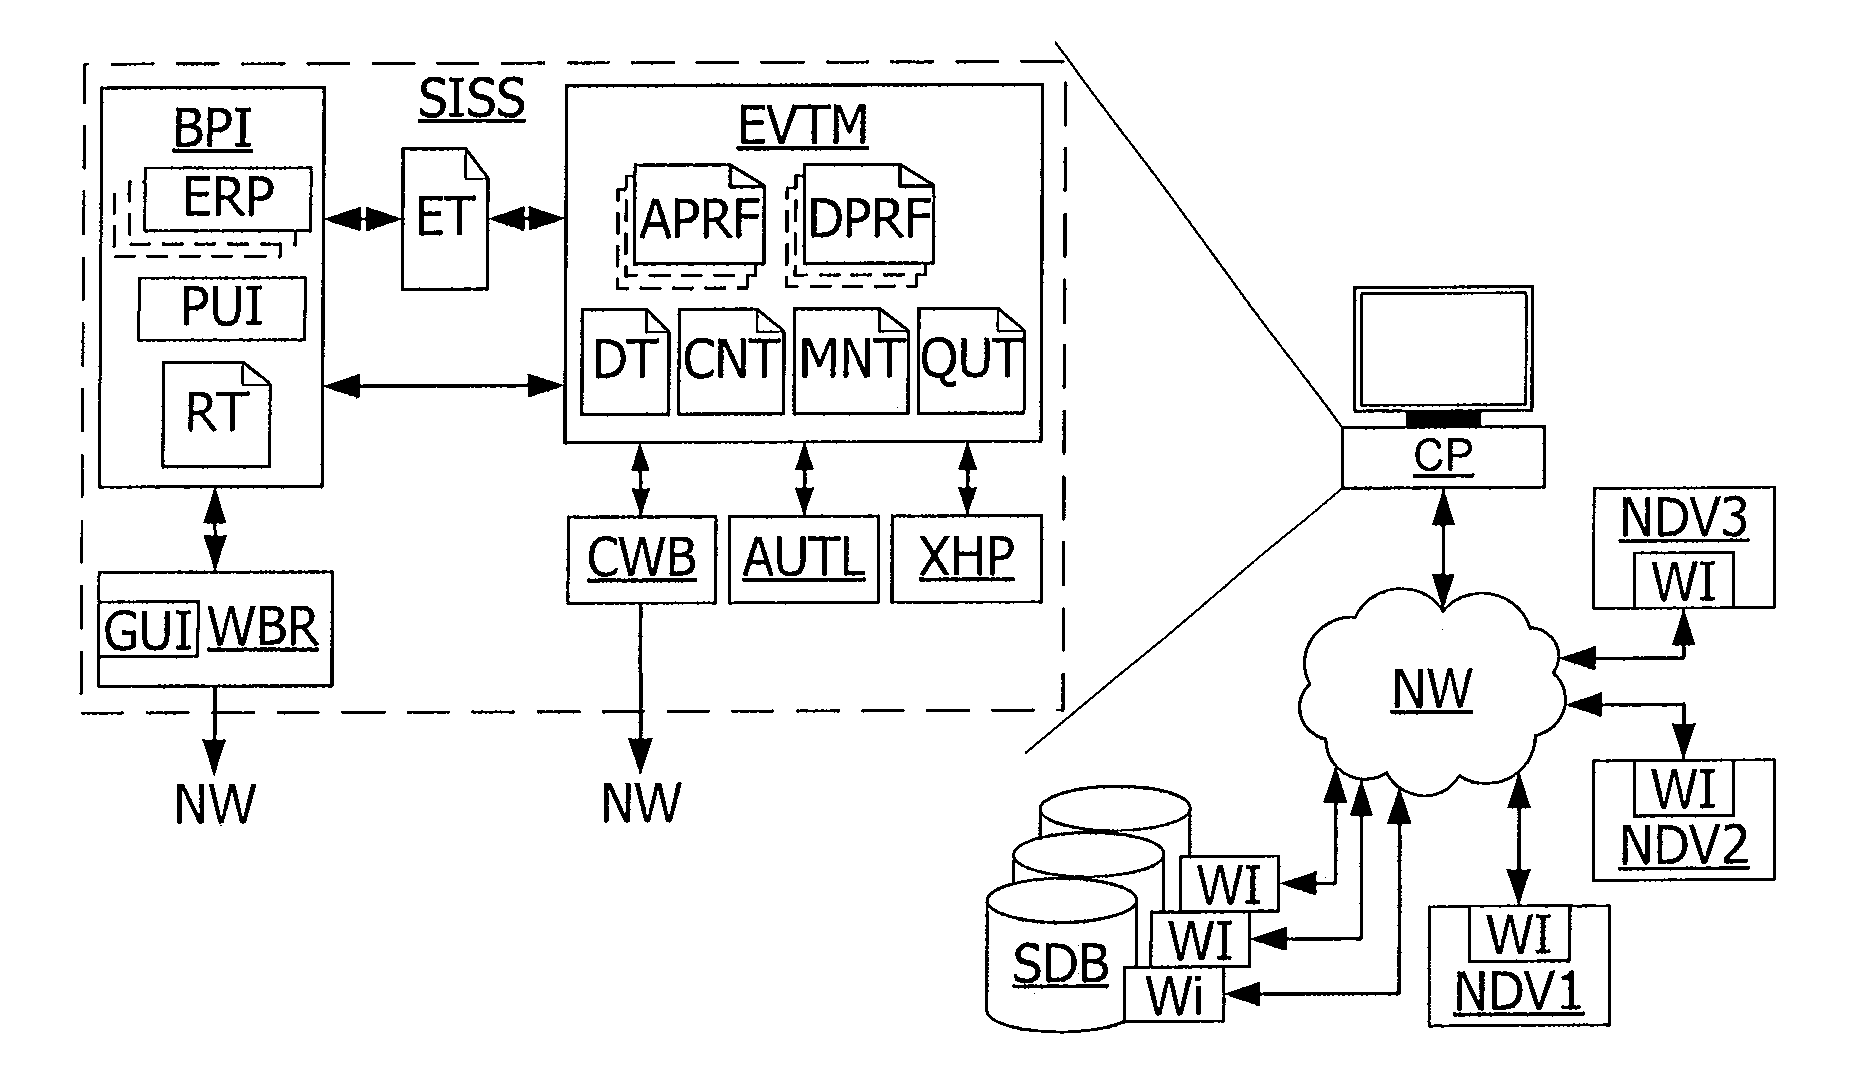 Method and system for assisting users with operating network devices